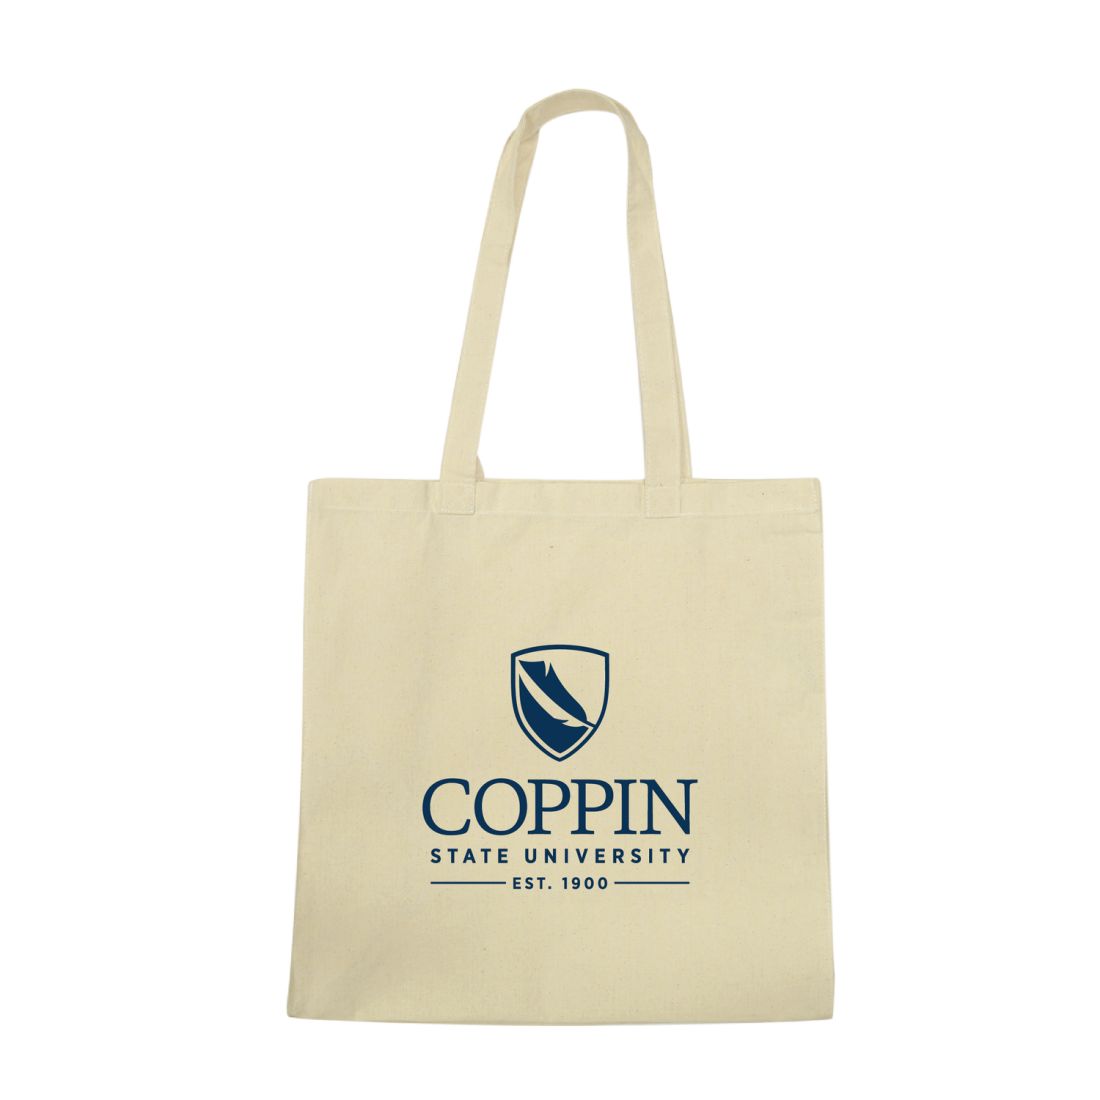 CSU Coppin State University Eagles Institutional Tote Bag